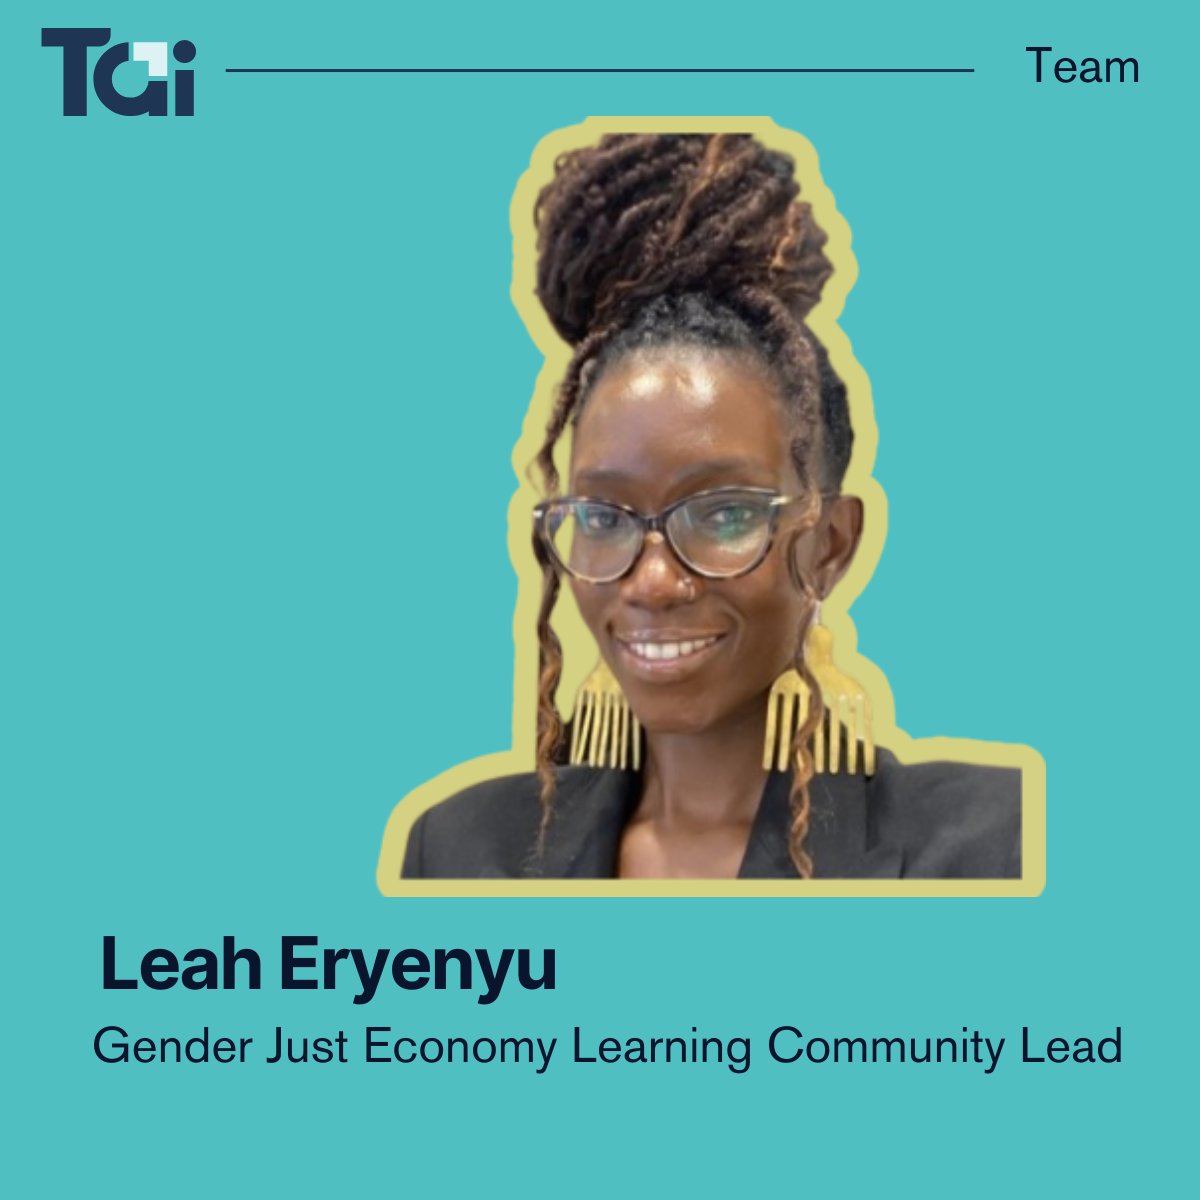 We are excited to welcome Leah Eryenyu (@ironladeyas) our new Gender Just Economy Learning Community Lead! Leah brings amazing expertise and a real passion for Economic Justice. We're thrilled to have her join our team and can't wait to see all the great work we'll do together.